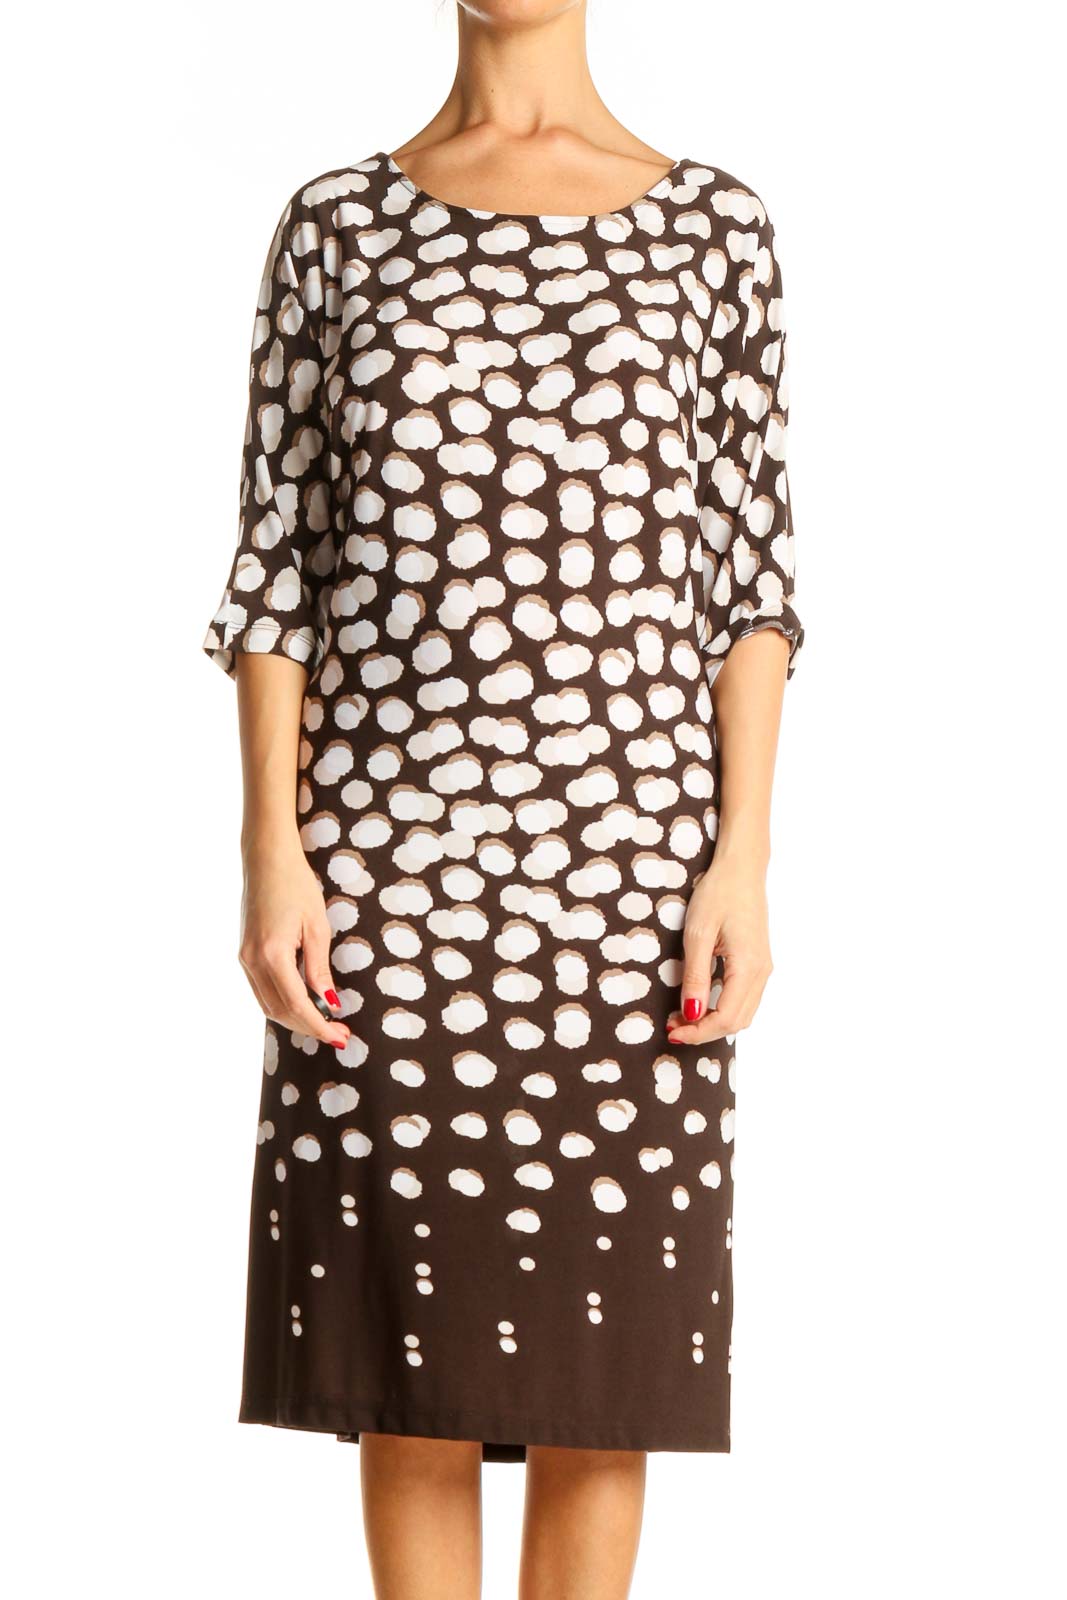 Brown Printed Classic Sheath Dress Front